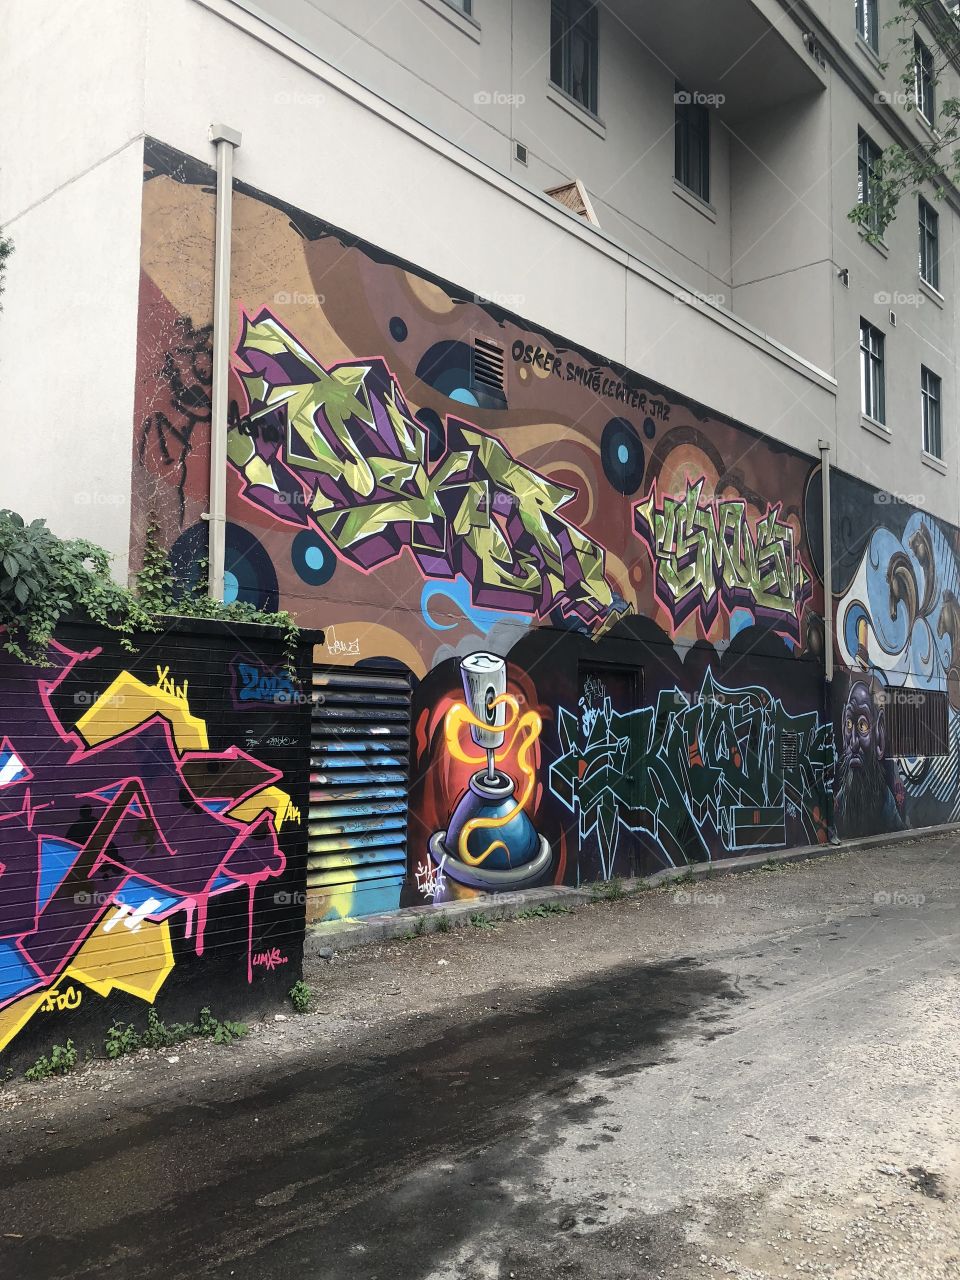 Graffiti alley in Toronto, Canada, a street with many colorful graphics on the walls